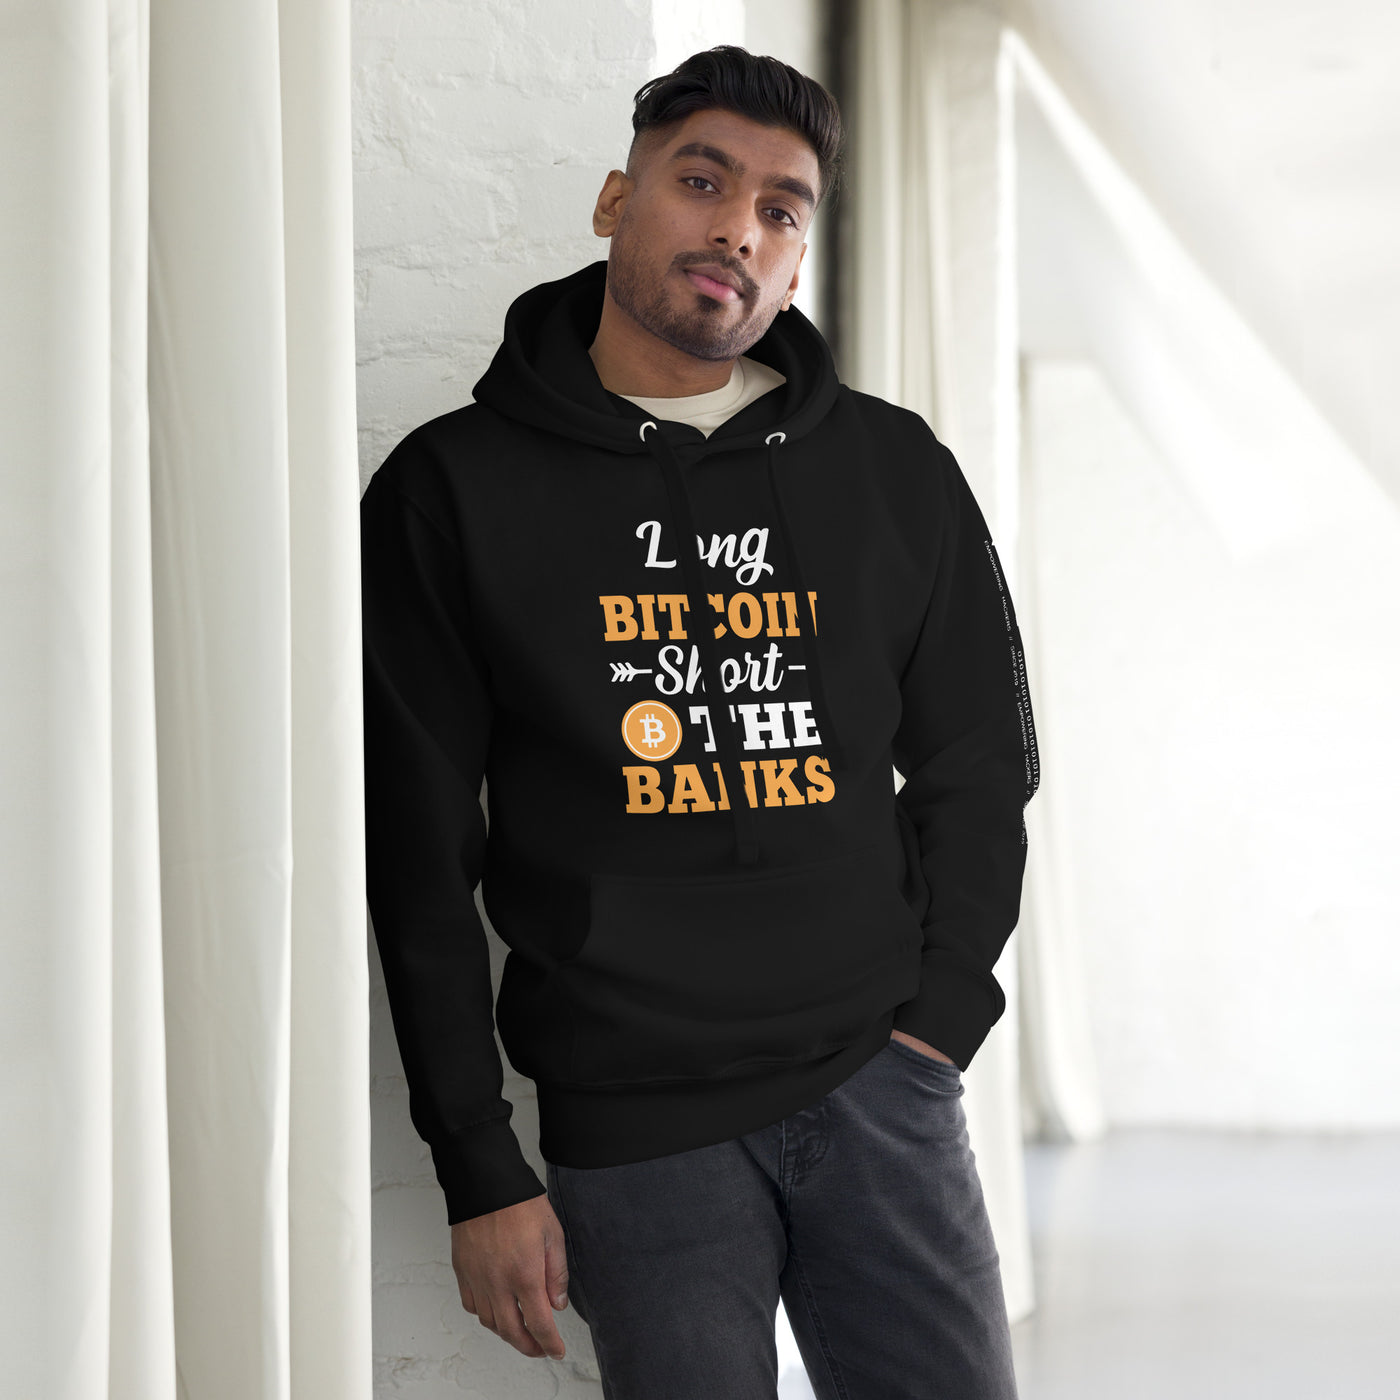 Long Big Coin, Short the Banks - Unisex Hoodie